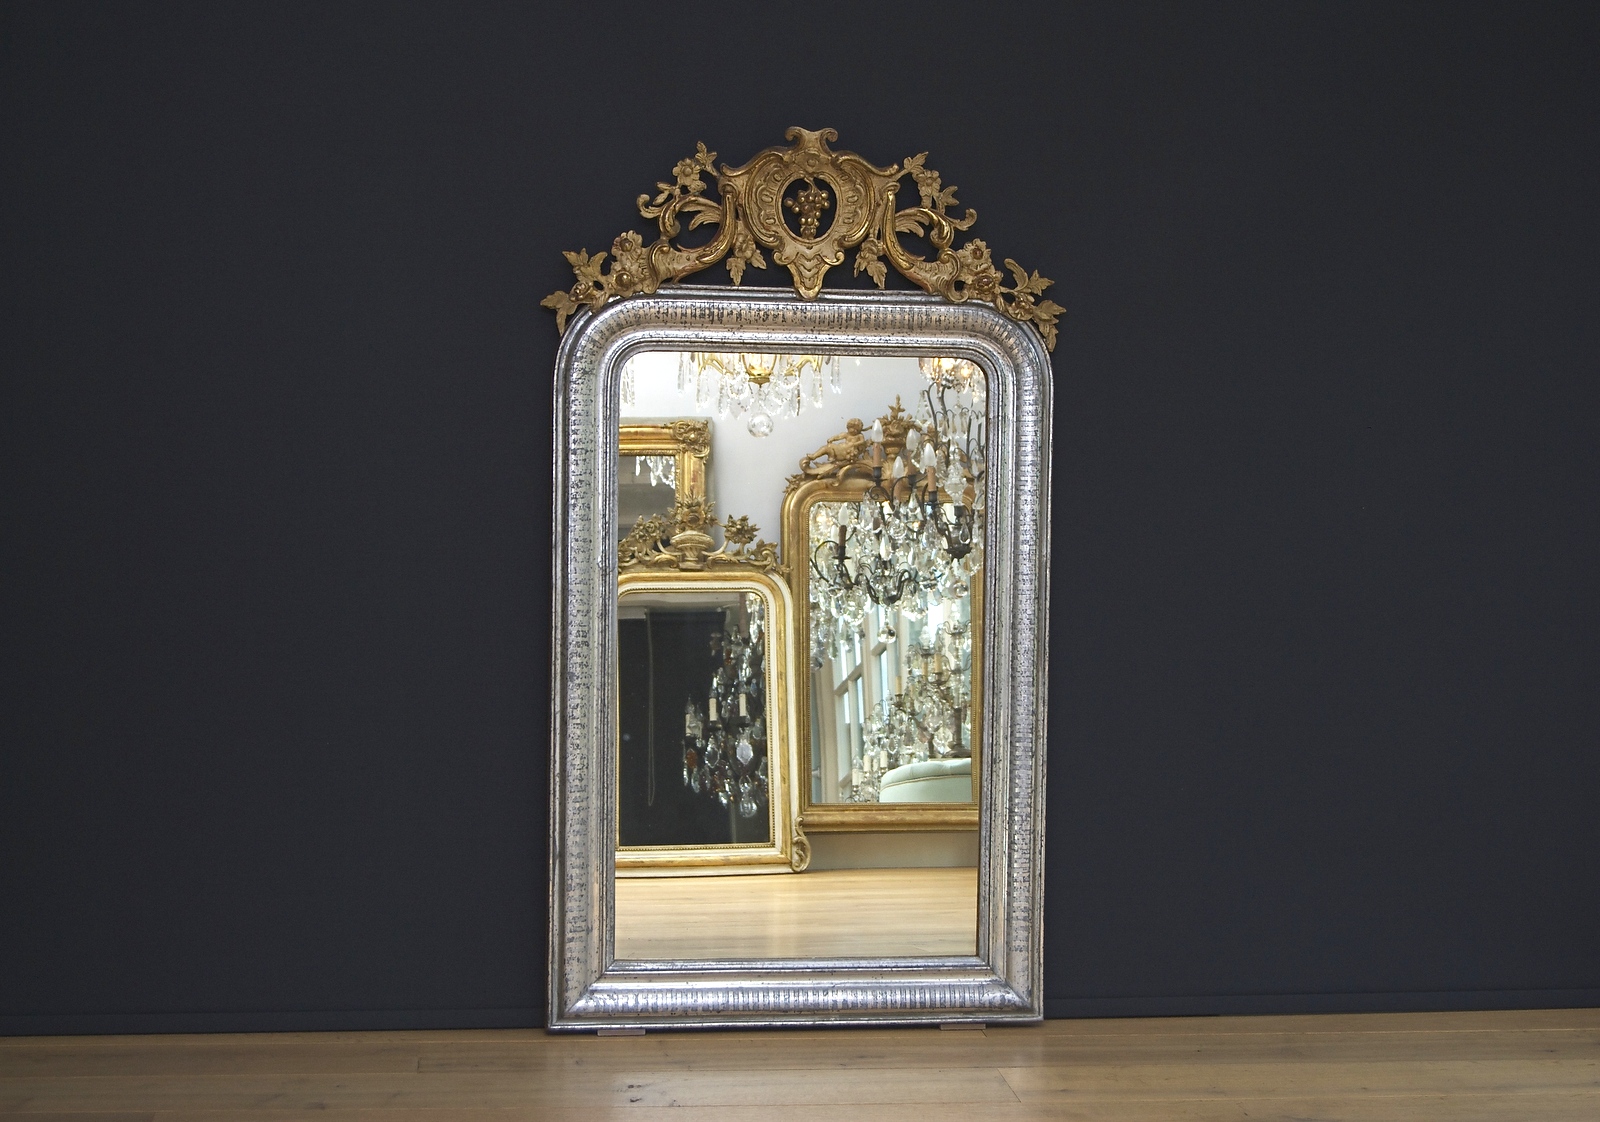 A beautiful antique French silvered mirror with a crest